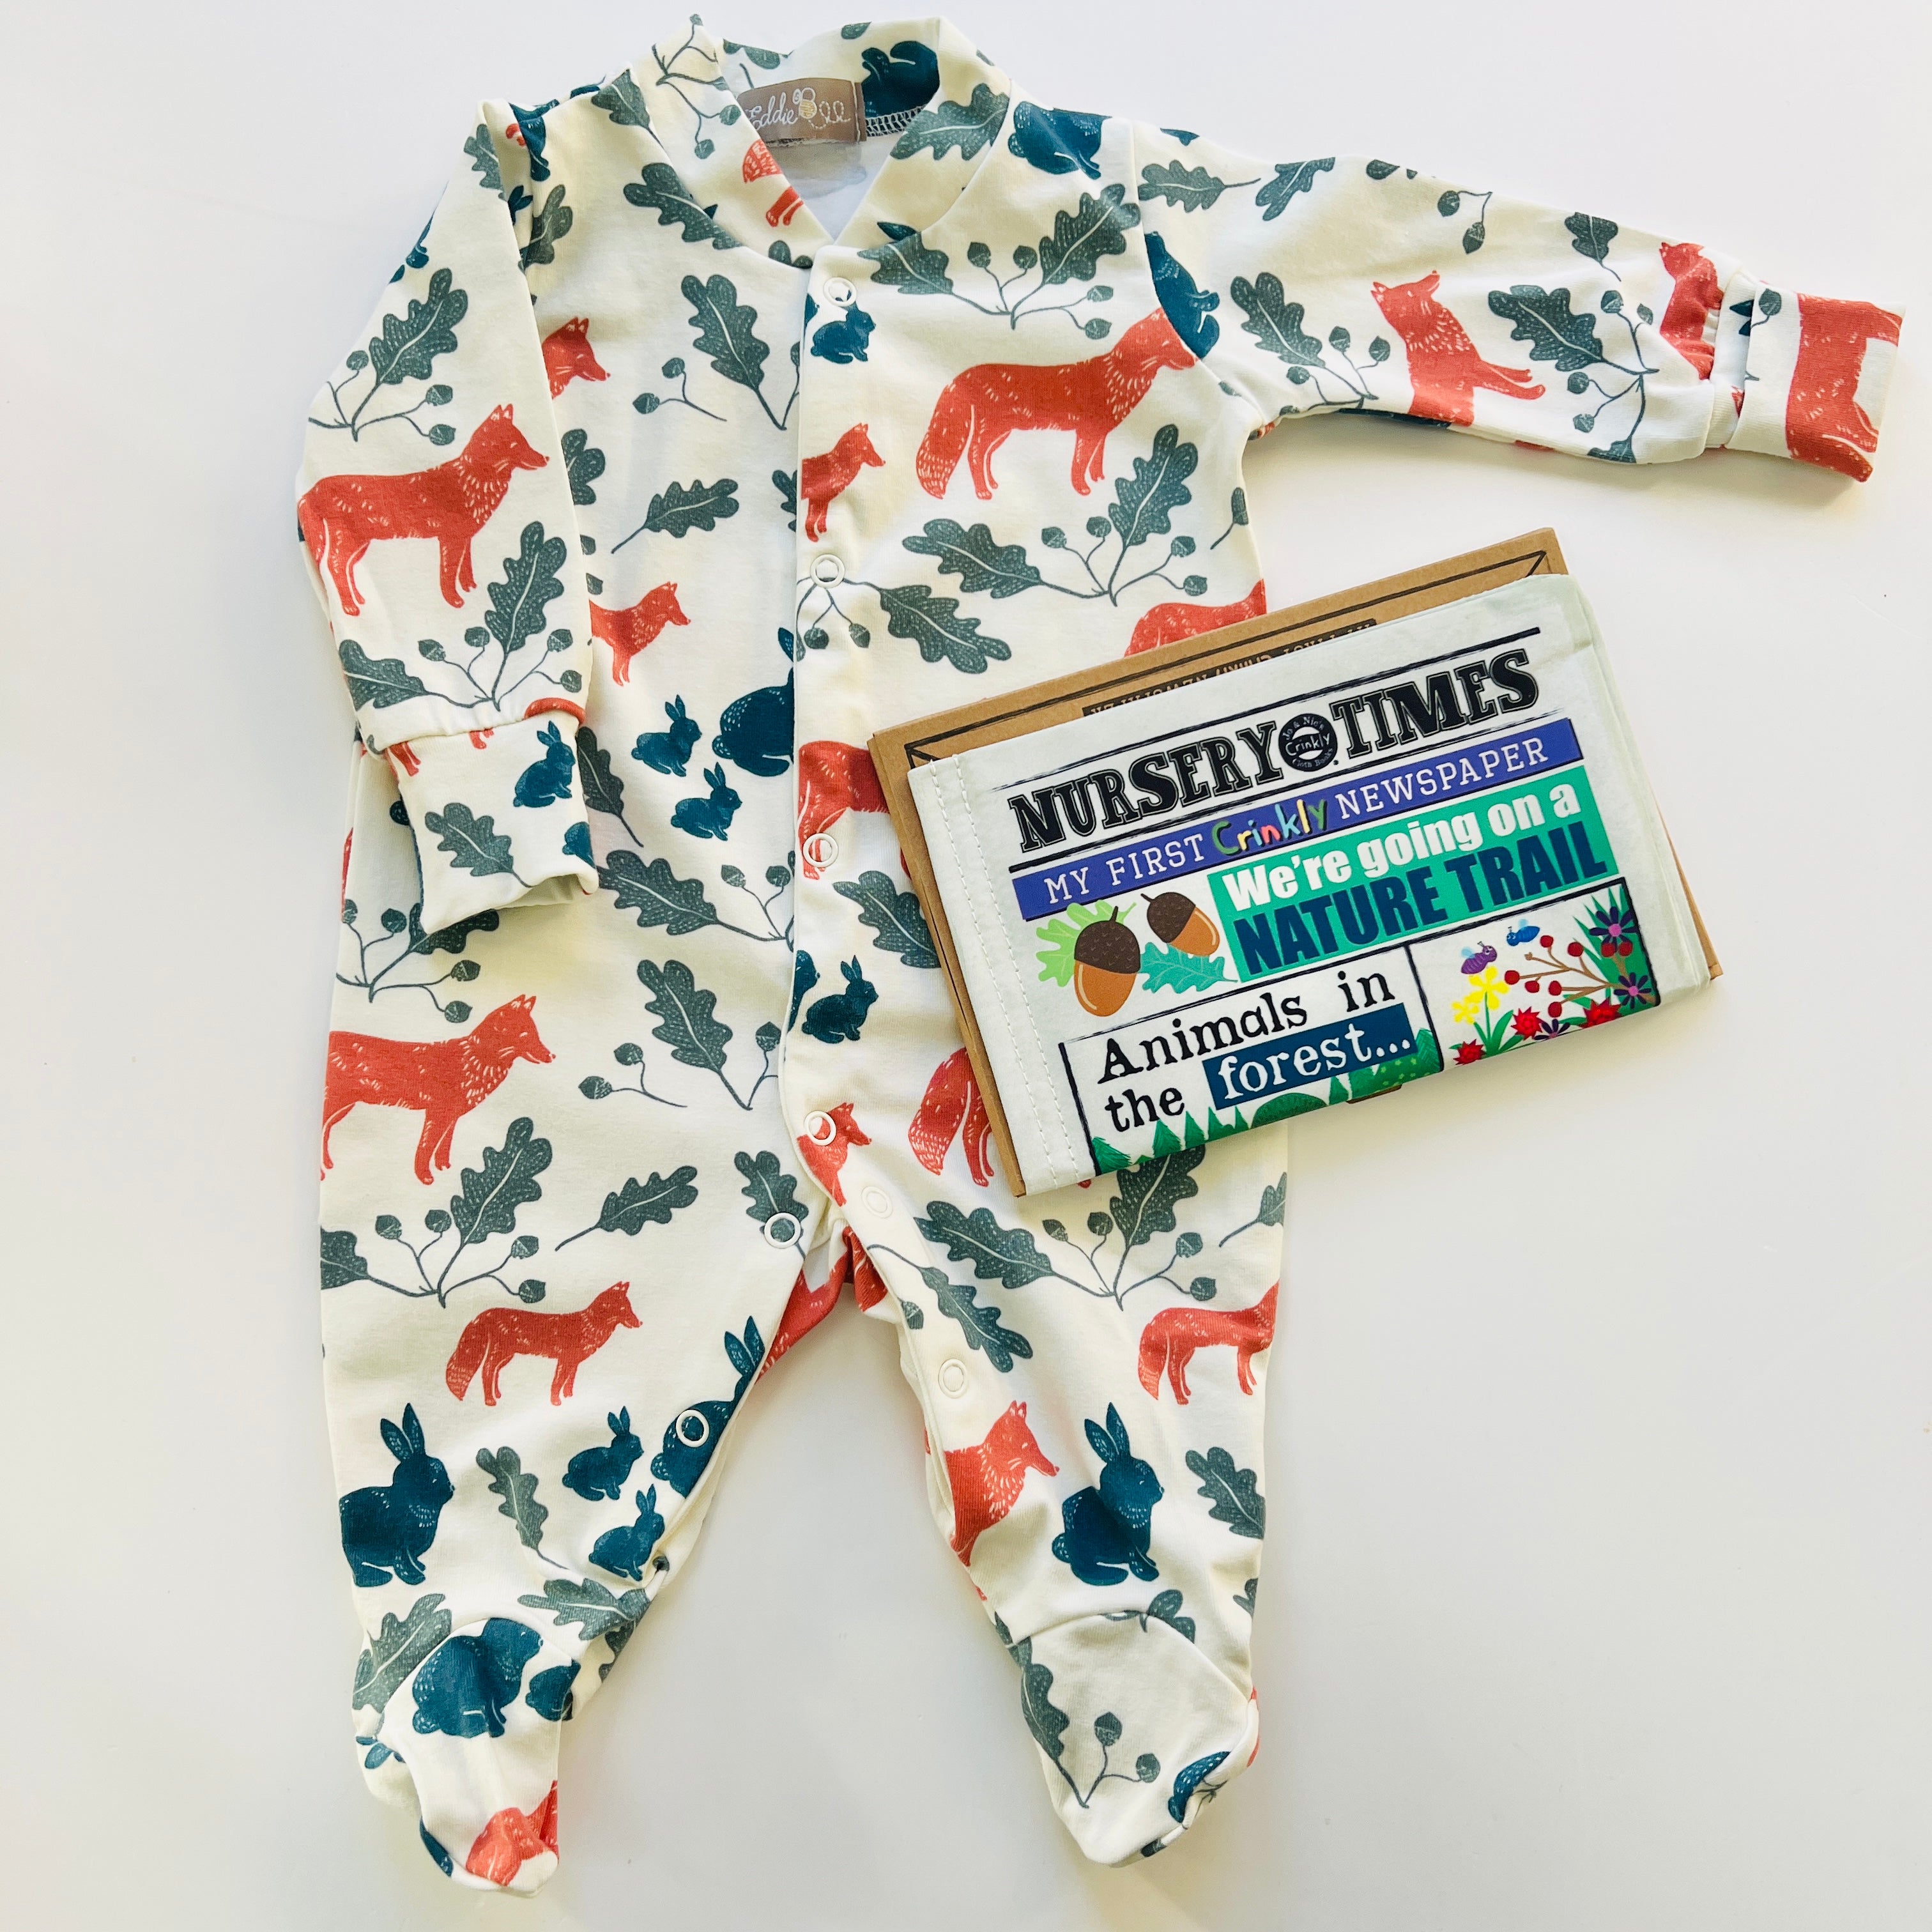 Autumn woodland Sleep suit and Nature Trail Crinkly Newspaper Gift Set